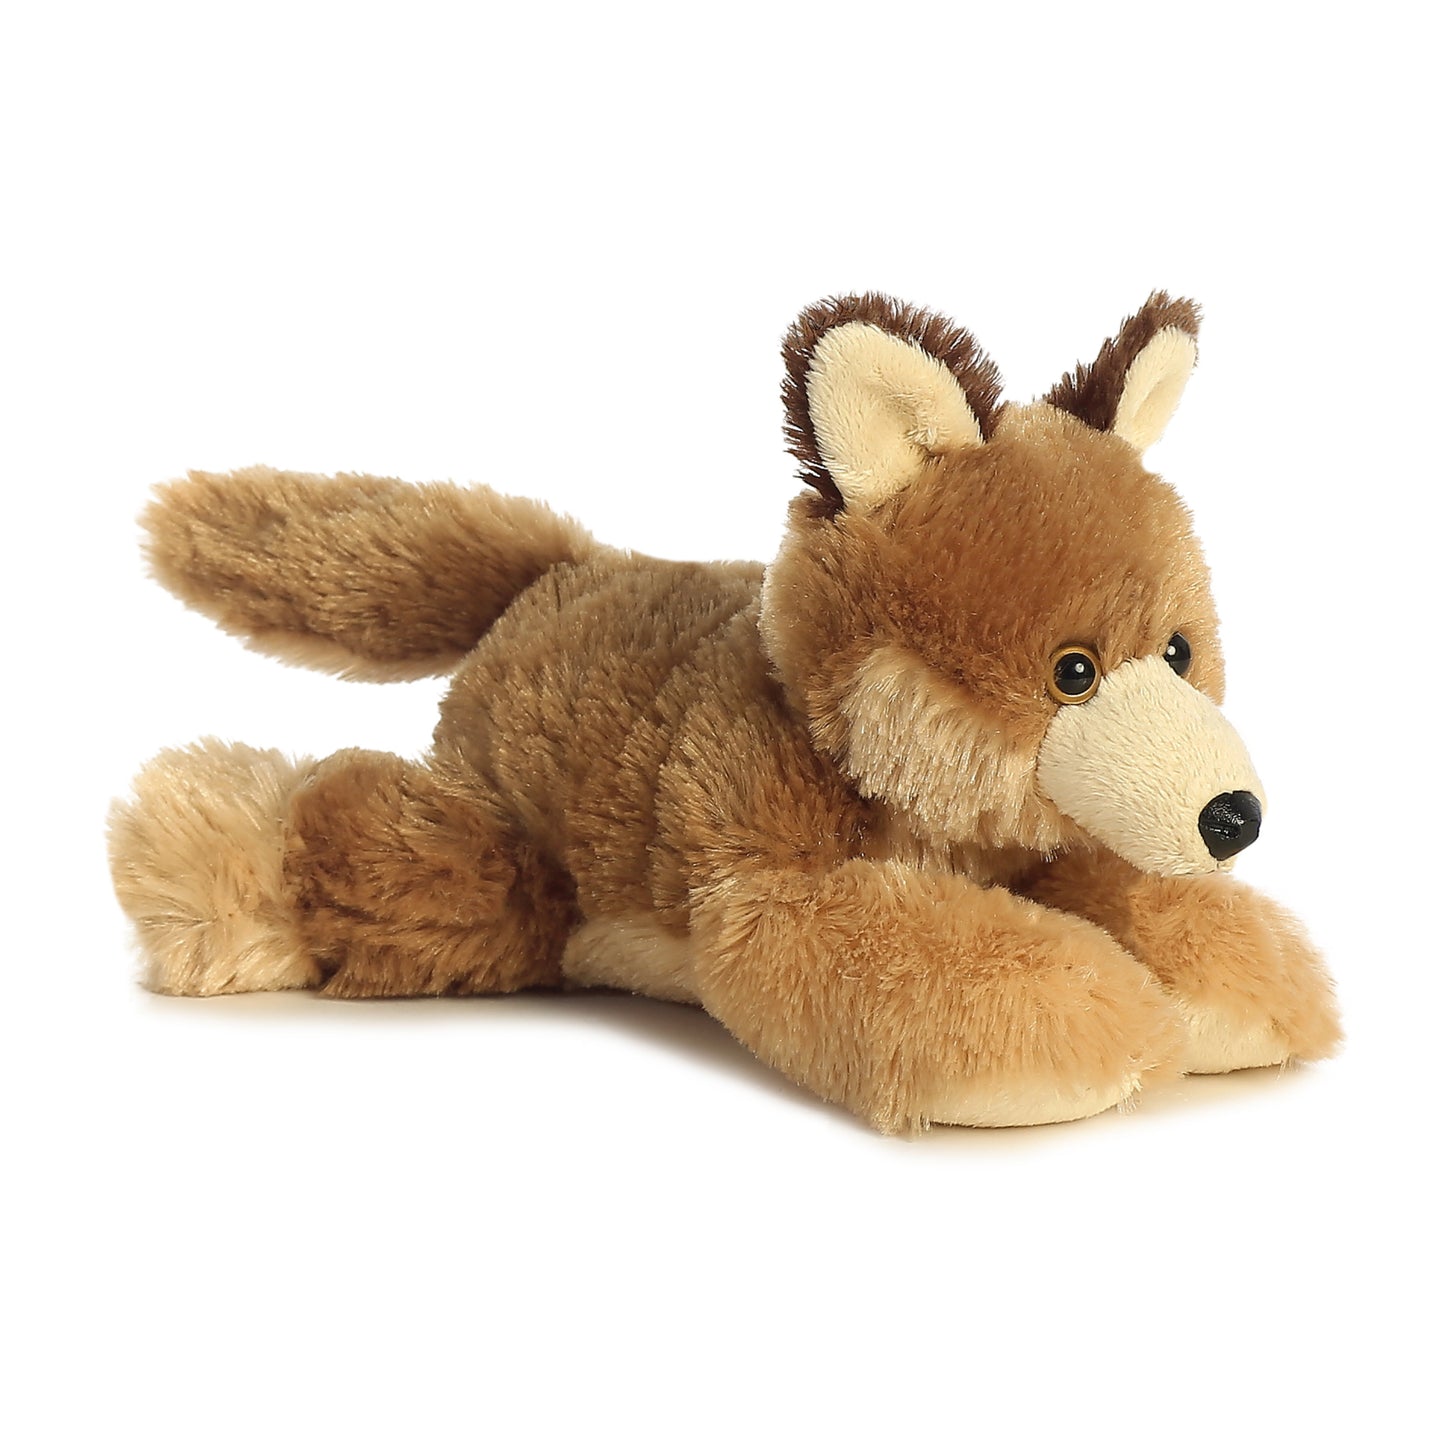 Clever Coyote 8" Flopsie Plush